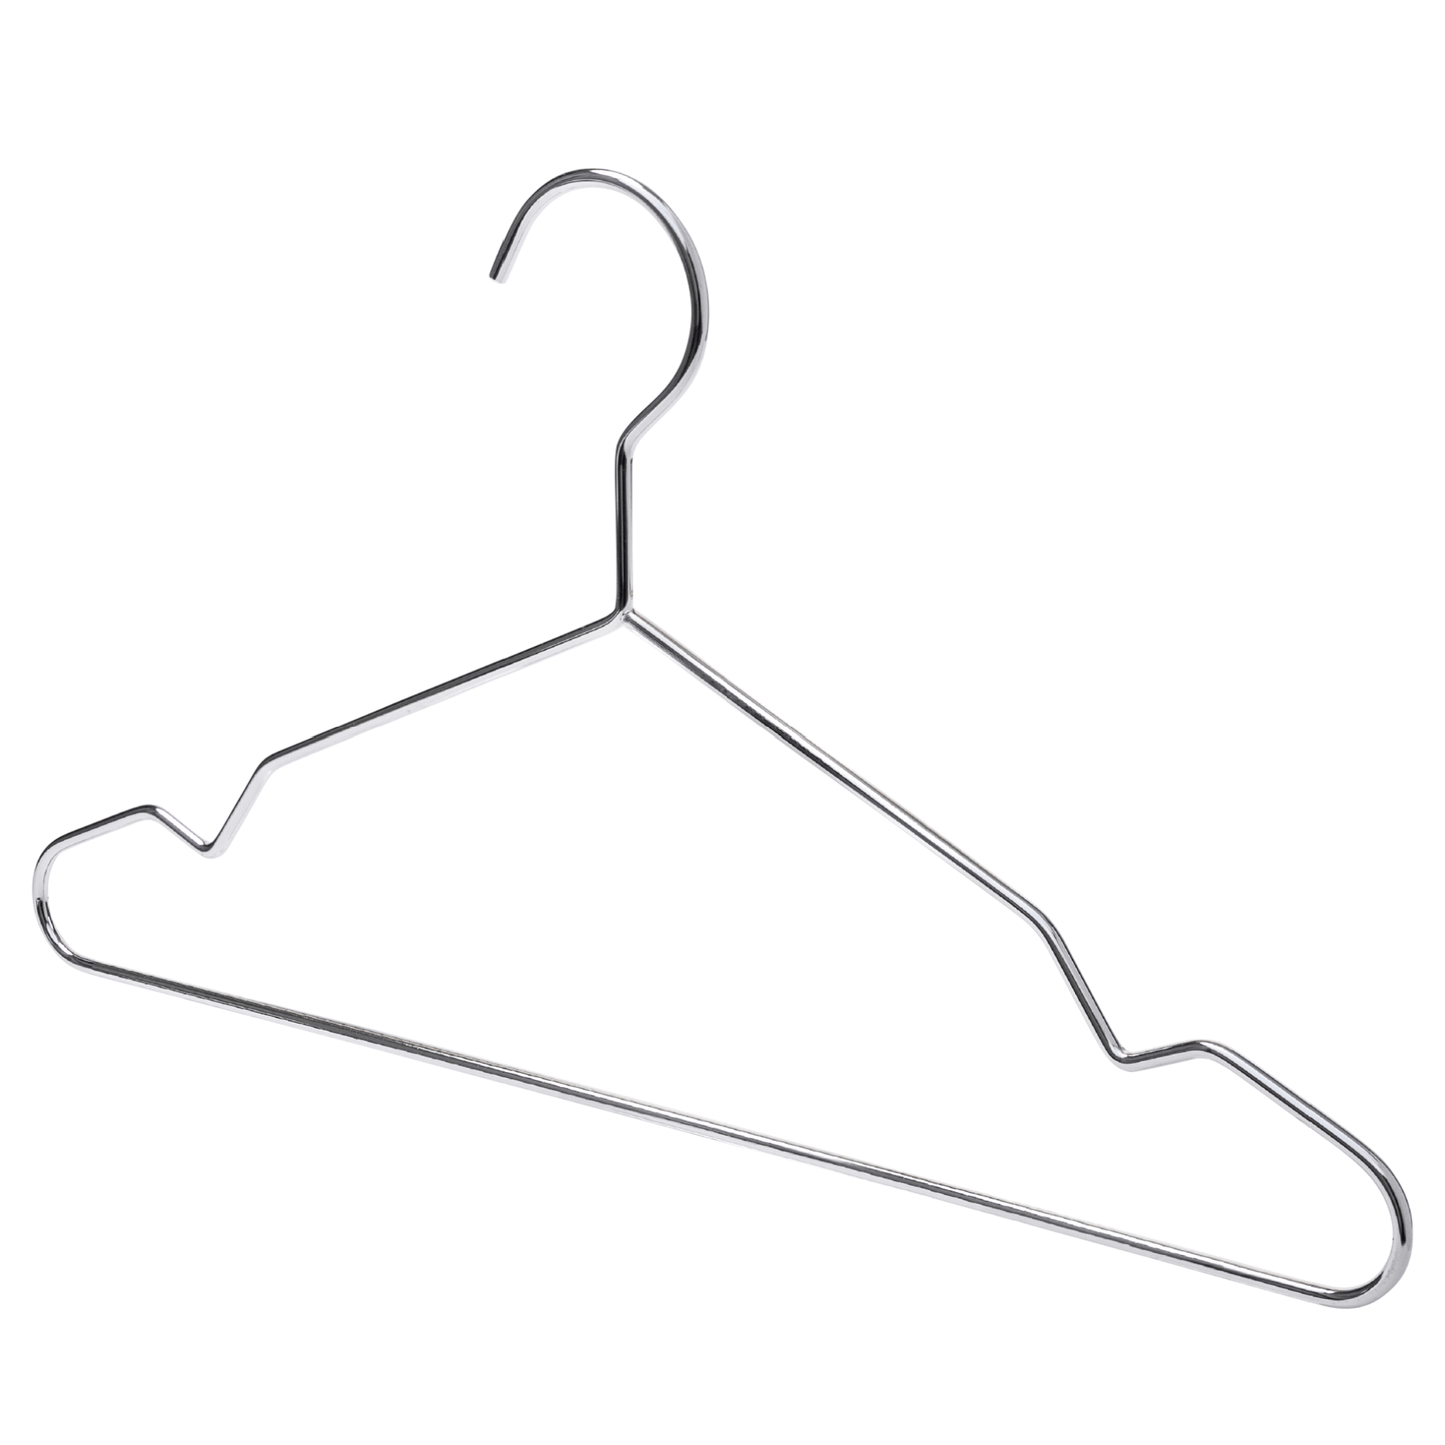 Heavy Duty Metal Suit Hanger - 43CM X 4.5mm Thick - With Notches (Sold in 25/50/100) - Hangersforless